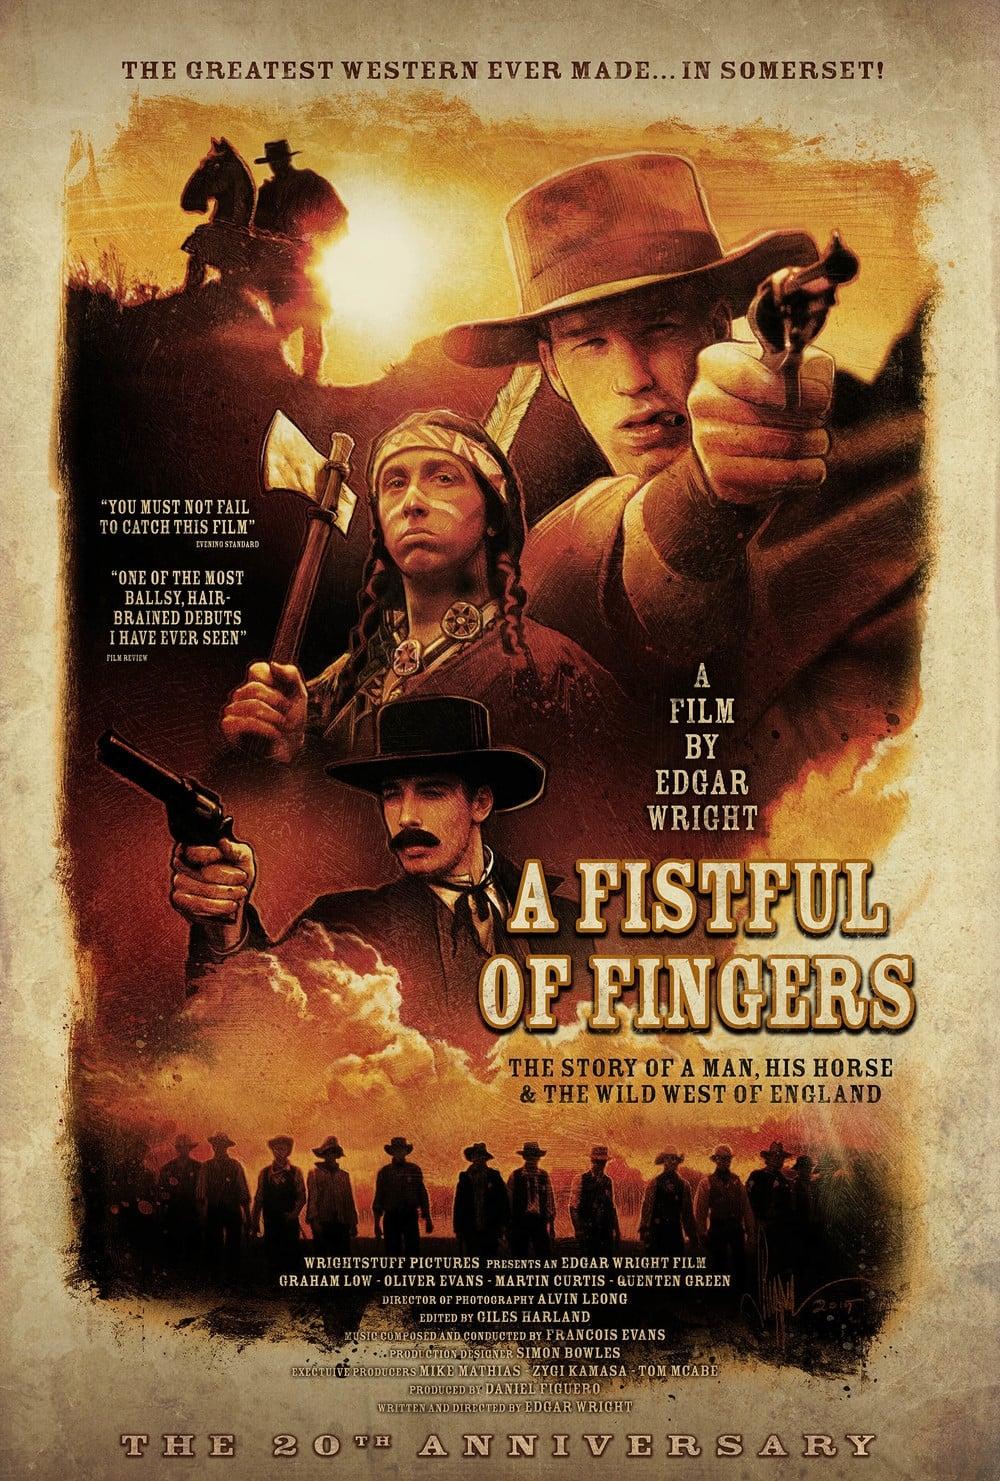 A Fistful of Fingers poster